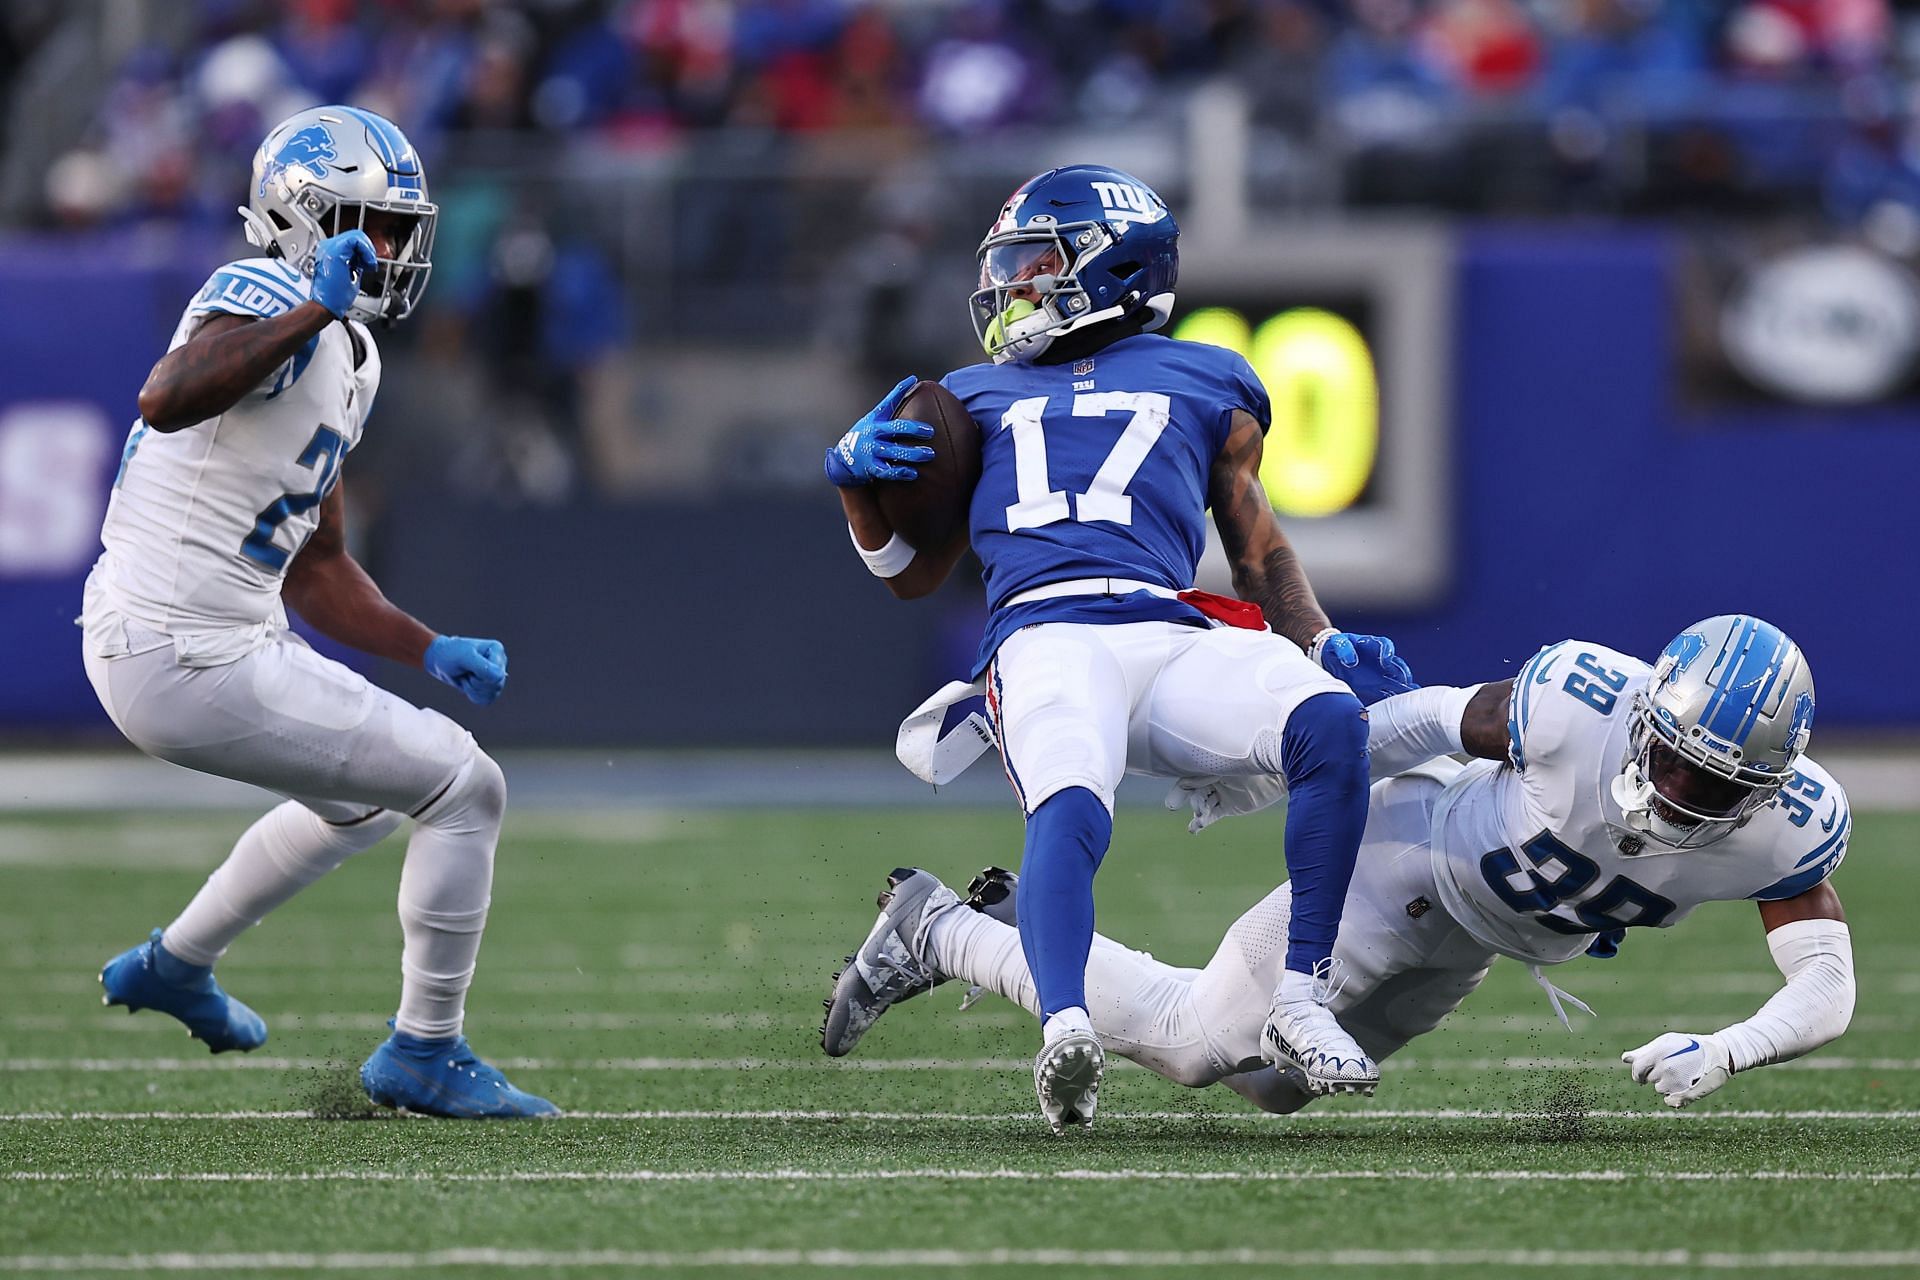 Does loss to the Detroit Lions prove Giants are overachievers?